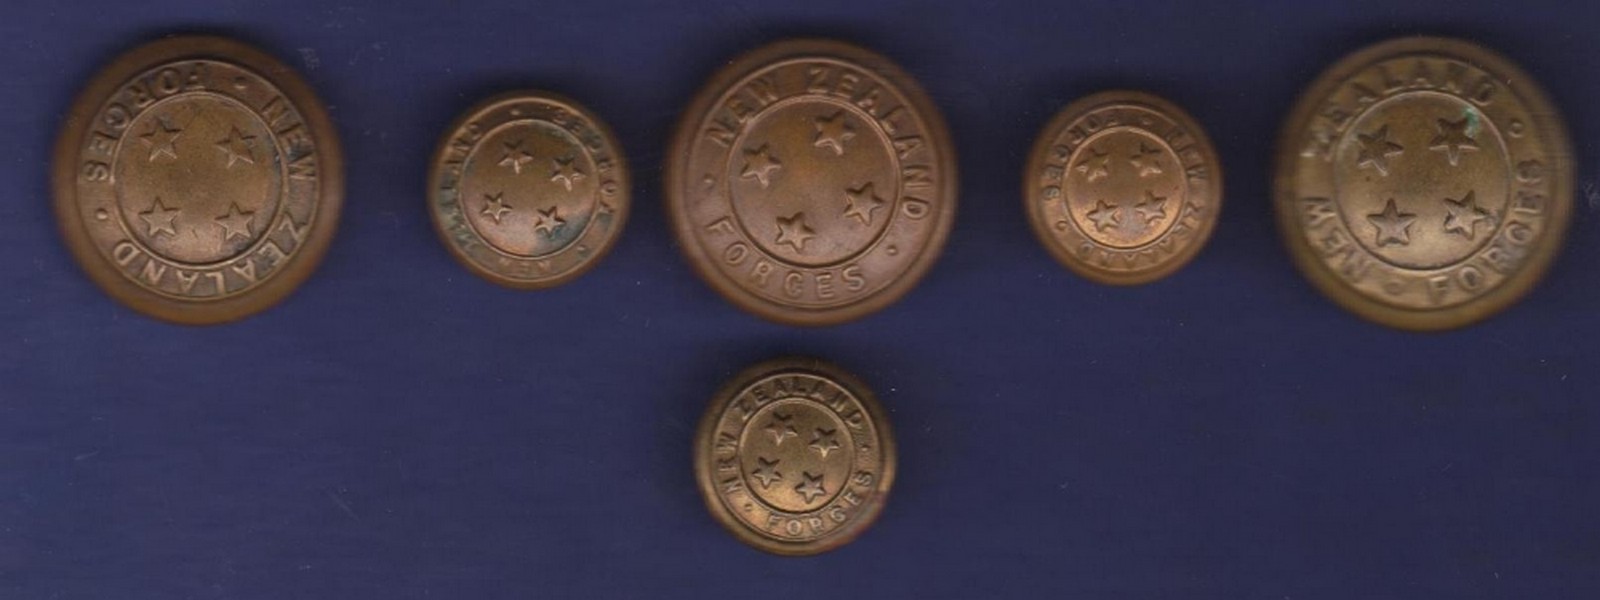 New Zealand Buttons (6), Large (3 small) (3), brass. GS Pattern - The Southern Cross 'New Zealand